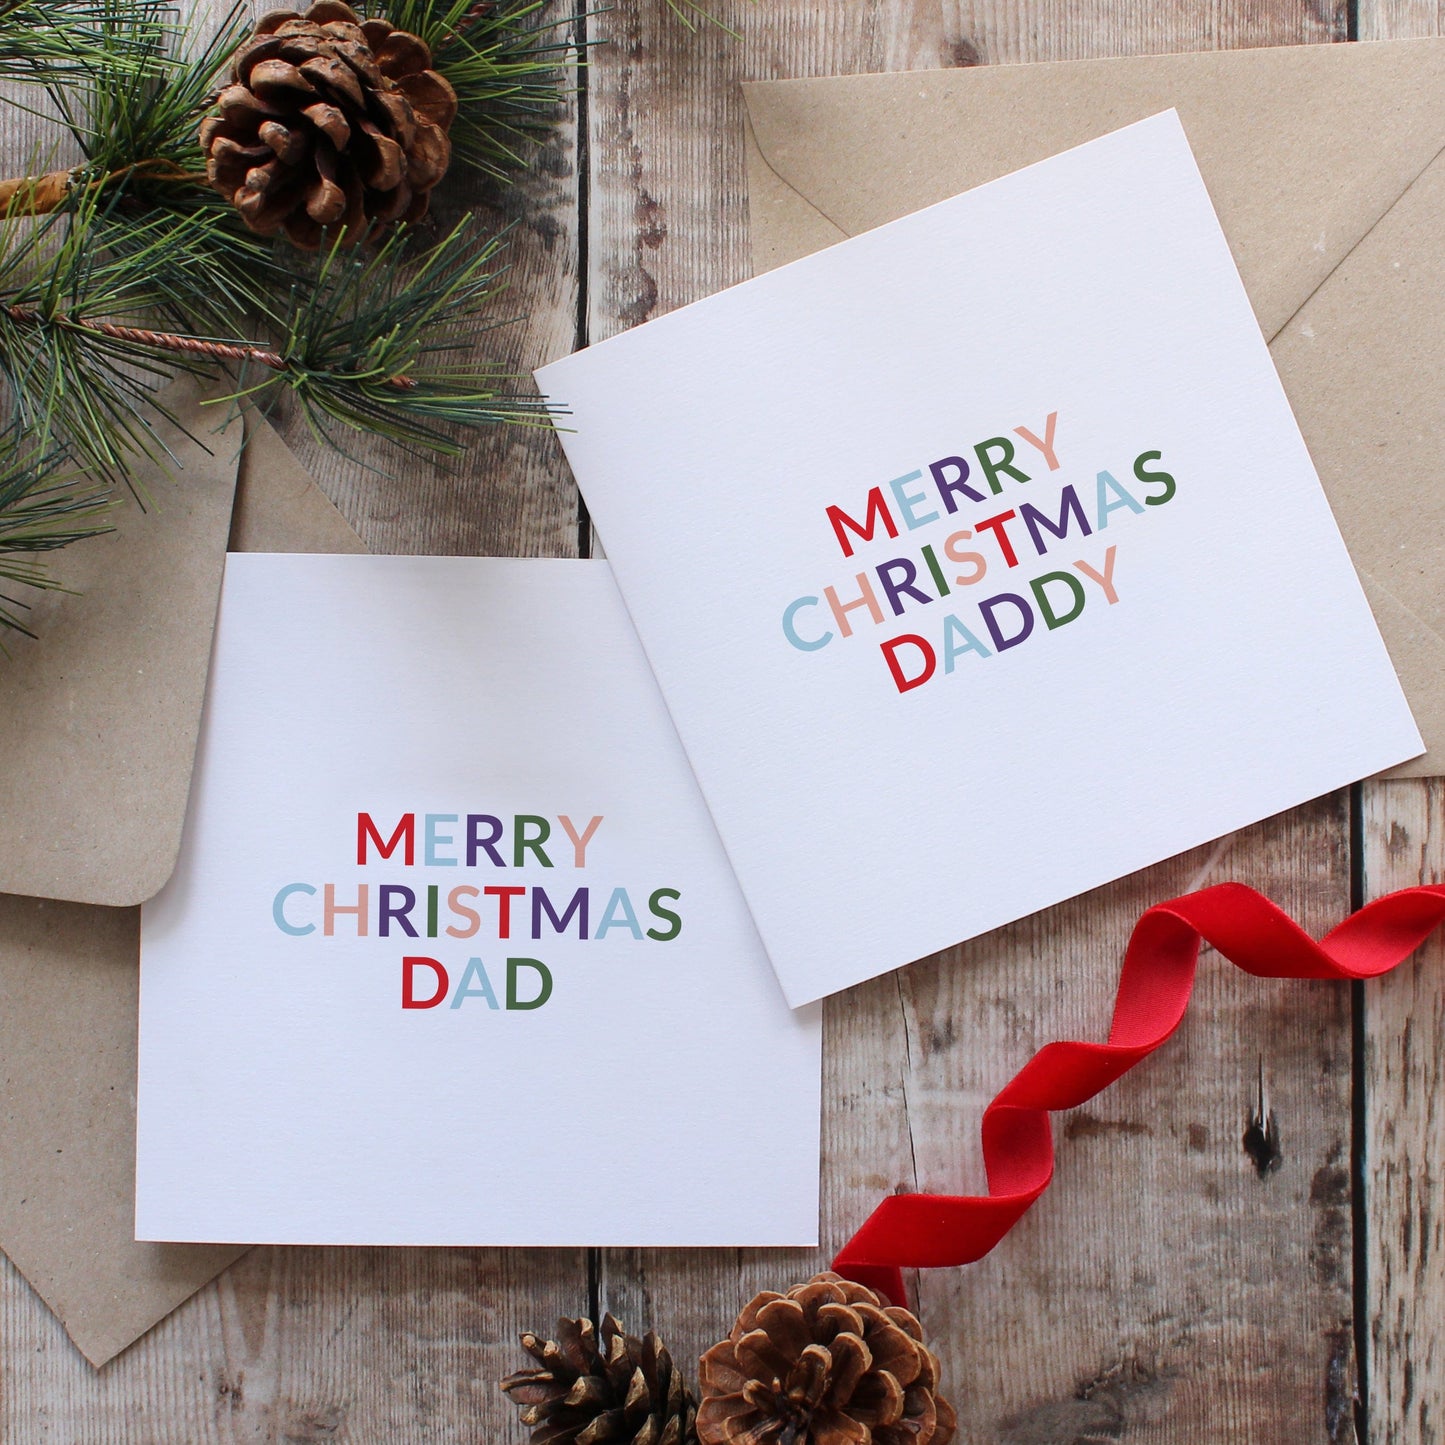 Merry Christmas daddy Christmas card from Purple Tree Designs